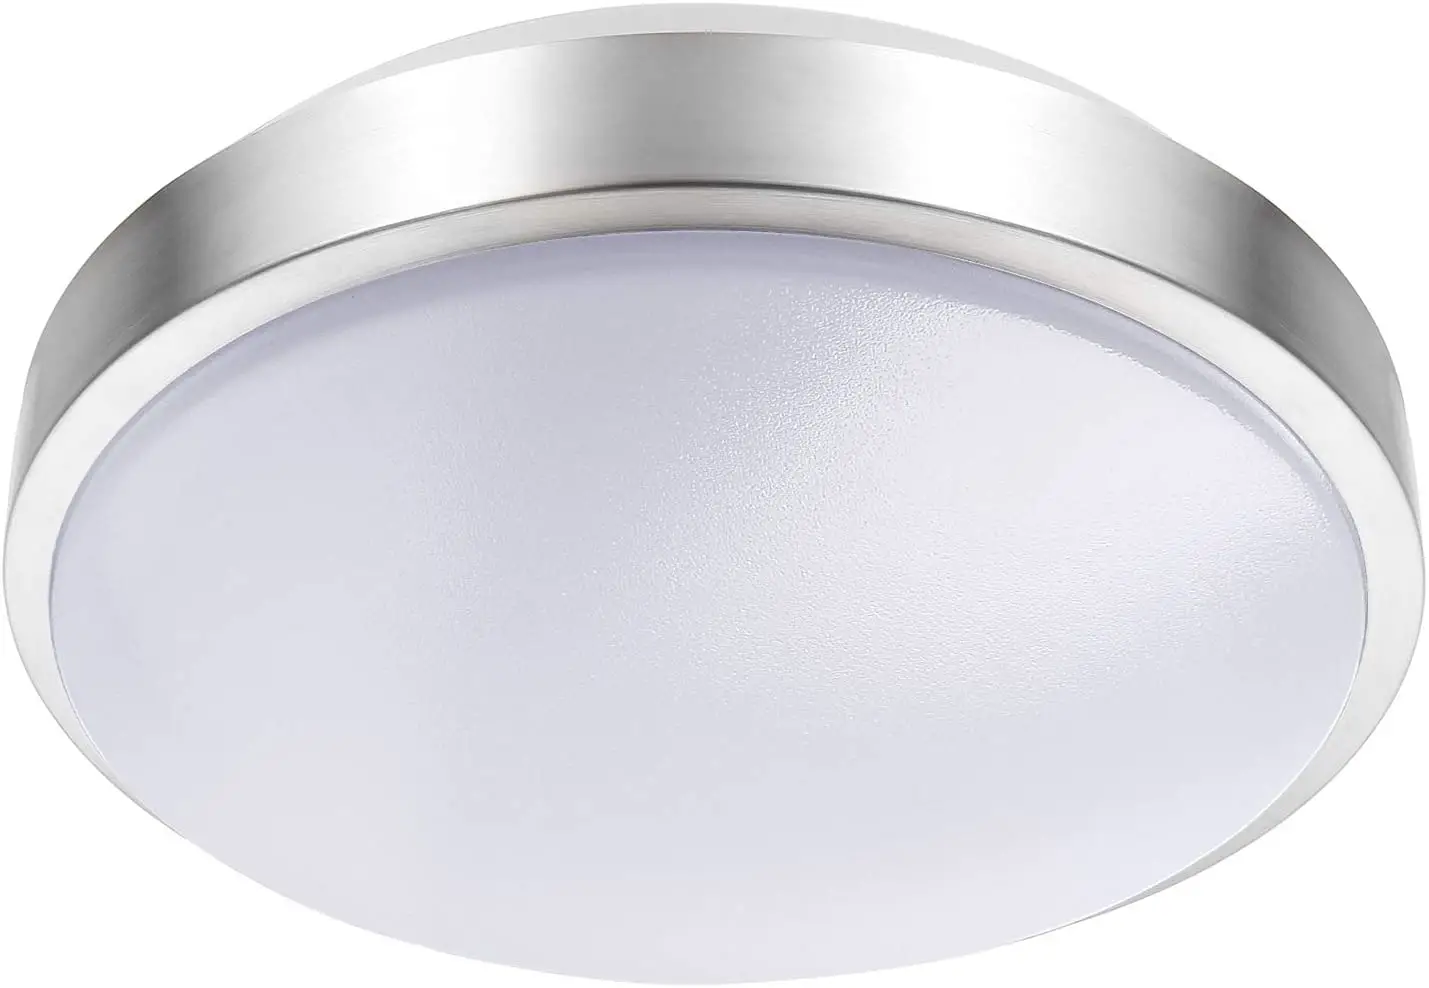 Outdoor LED ceiling lights